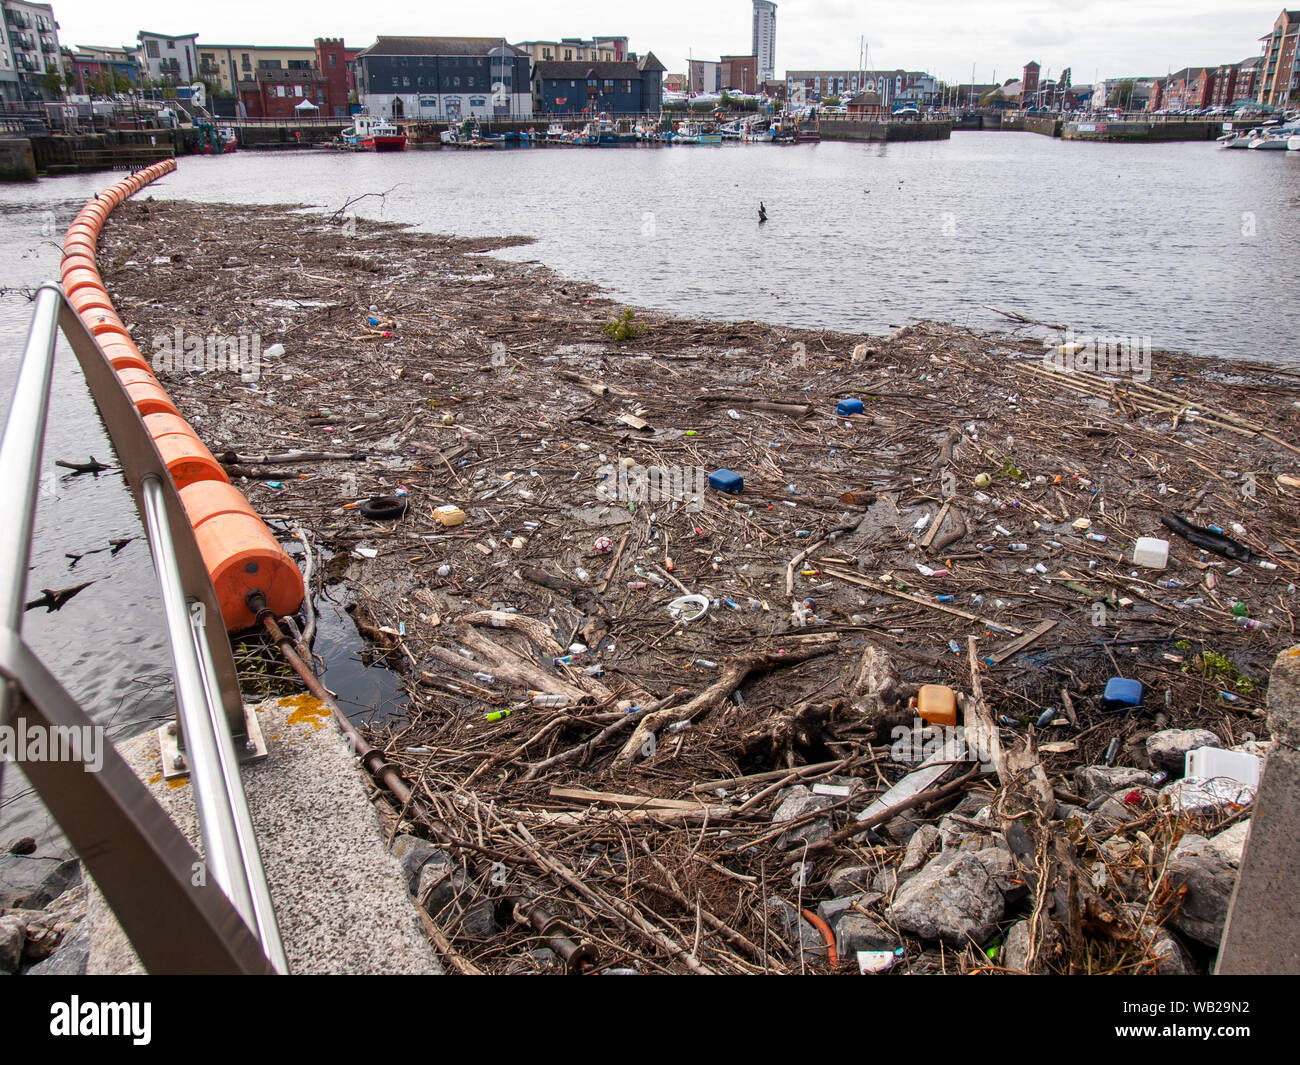 Floating barrier full of rubbish, wood, plastic bottles and other rubbish near the the mouth of the River Tawe in Swansea, Wales, UK. Stock Photo